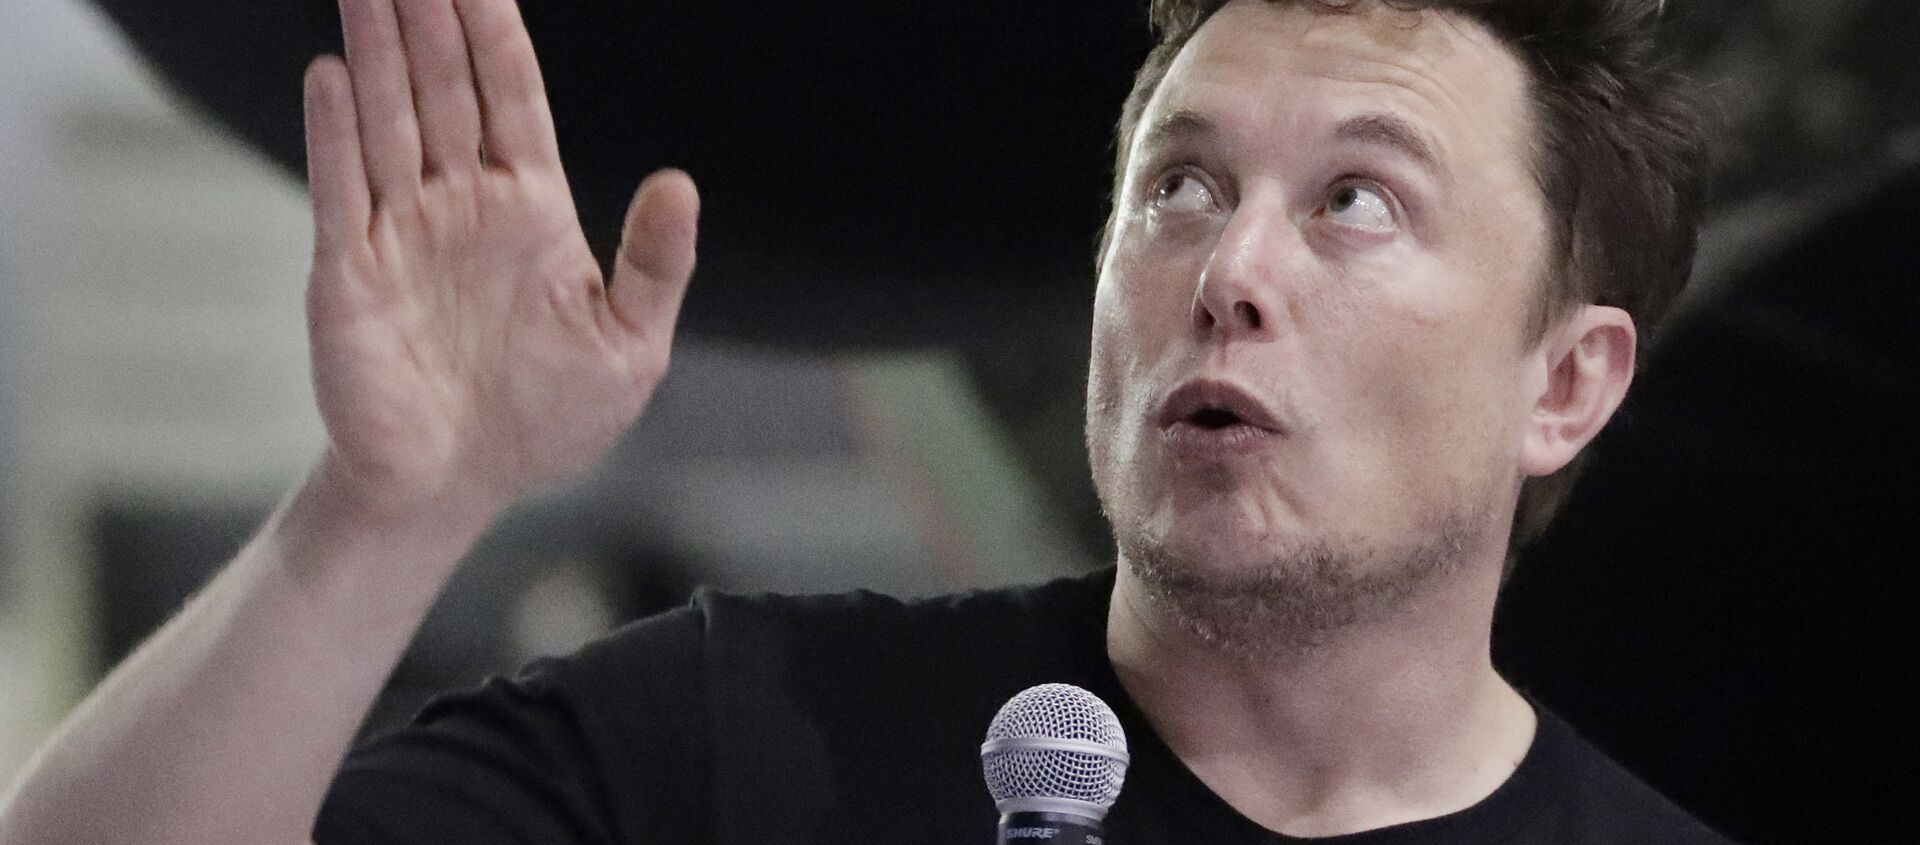 SpaceX founder and chief executive Elon Musk speaks after announcing Japanese billionaire Yusaku Maezawa as the first private passenger on a trip around the moon, Monday, Sept. 17, 2018, in Hawthorne, Calif - Sputnik International, 1920, 10.01.2021